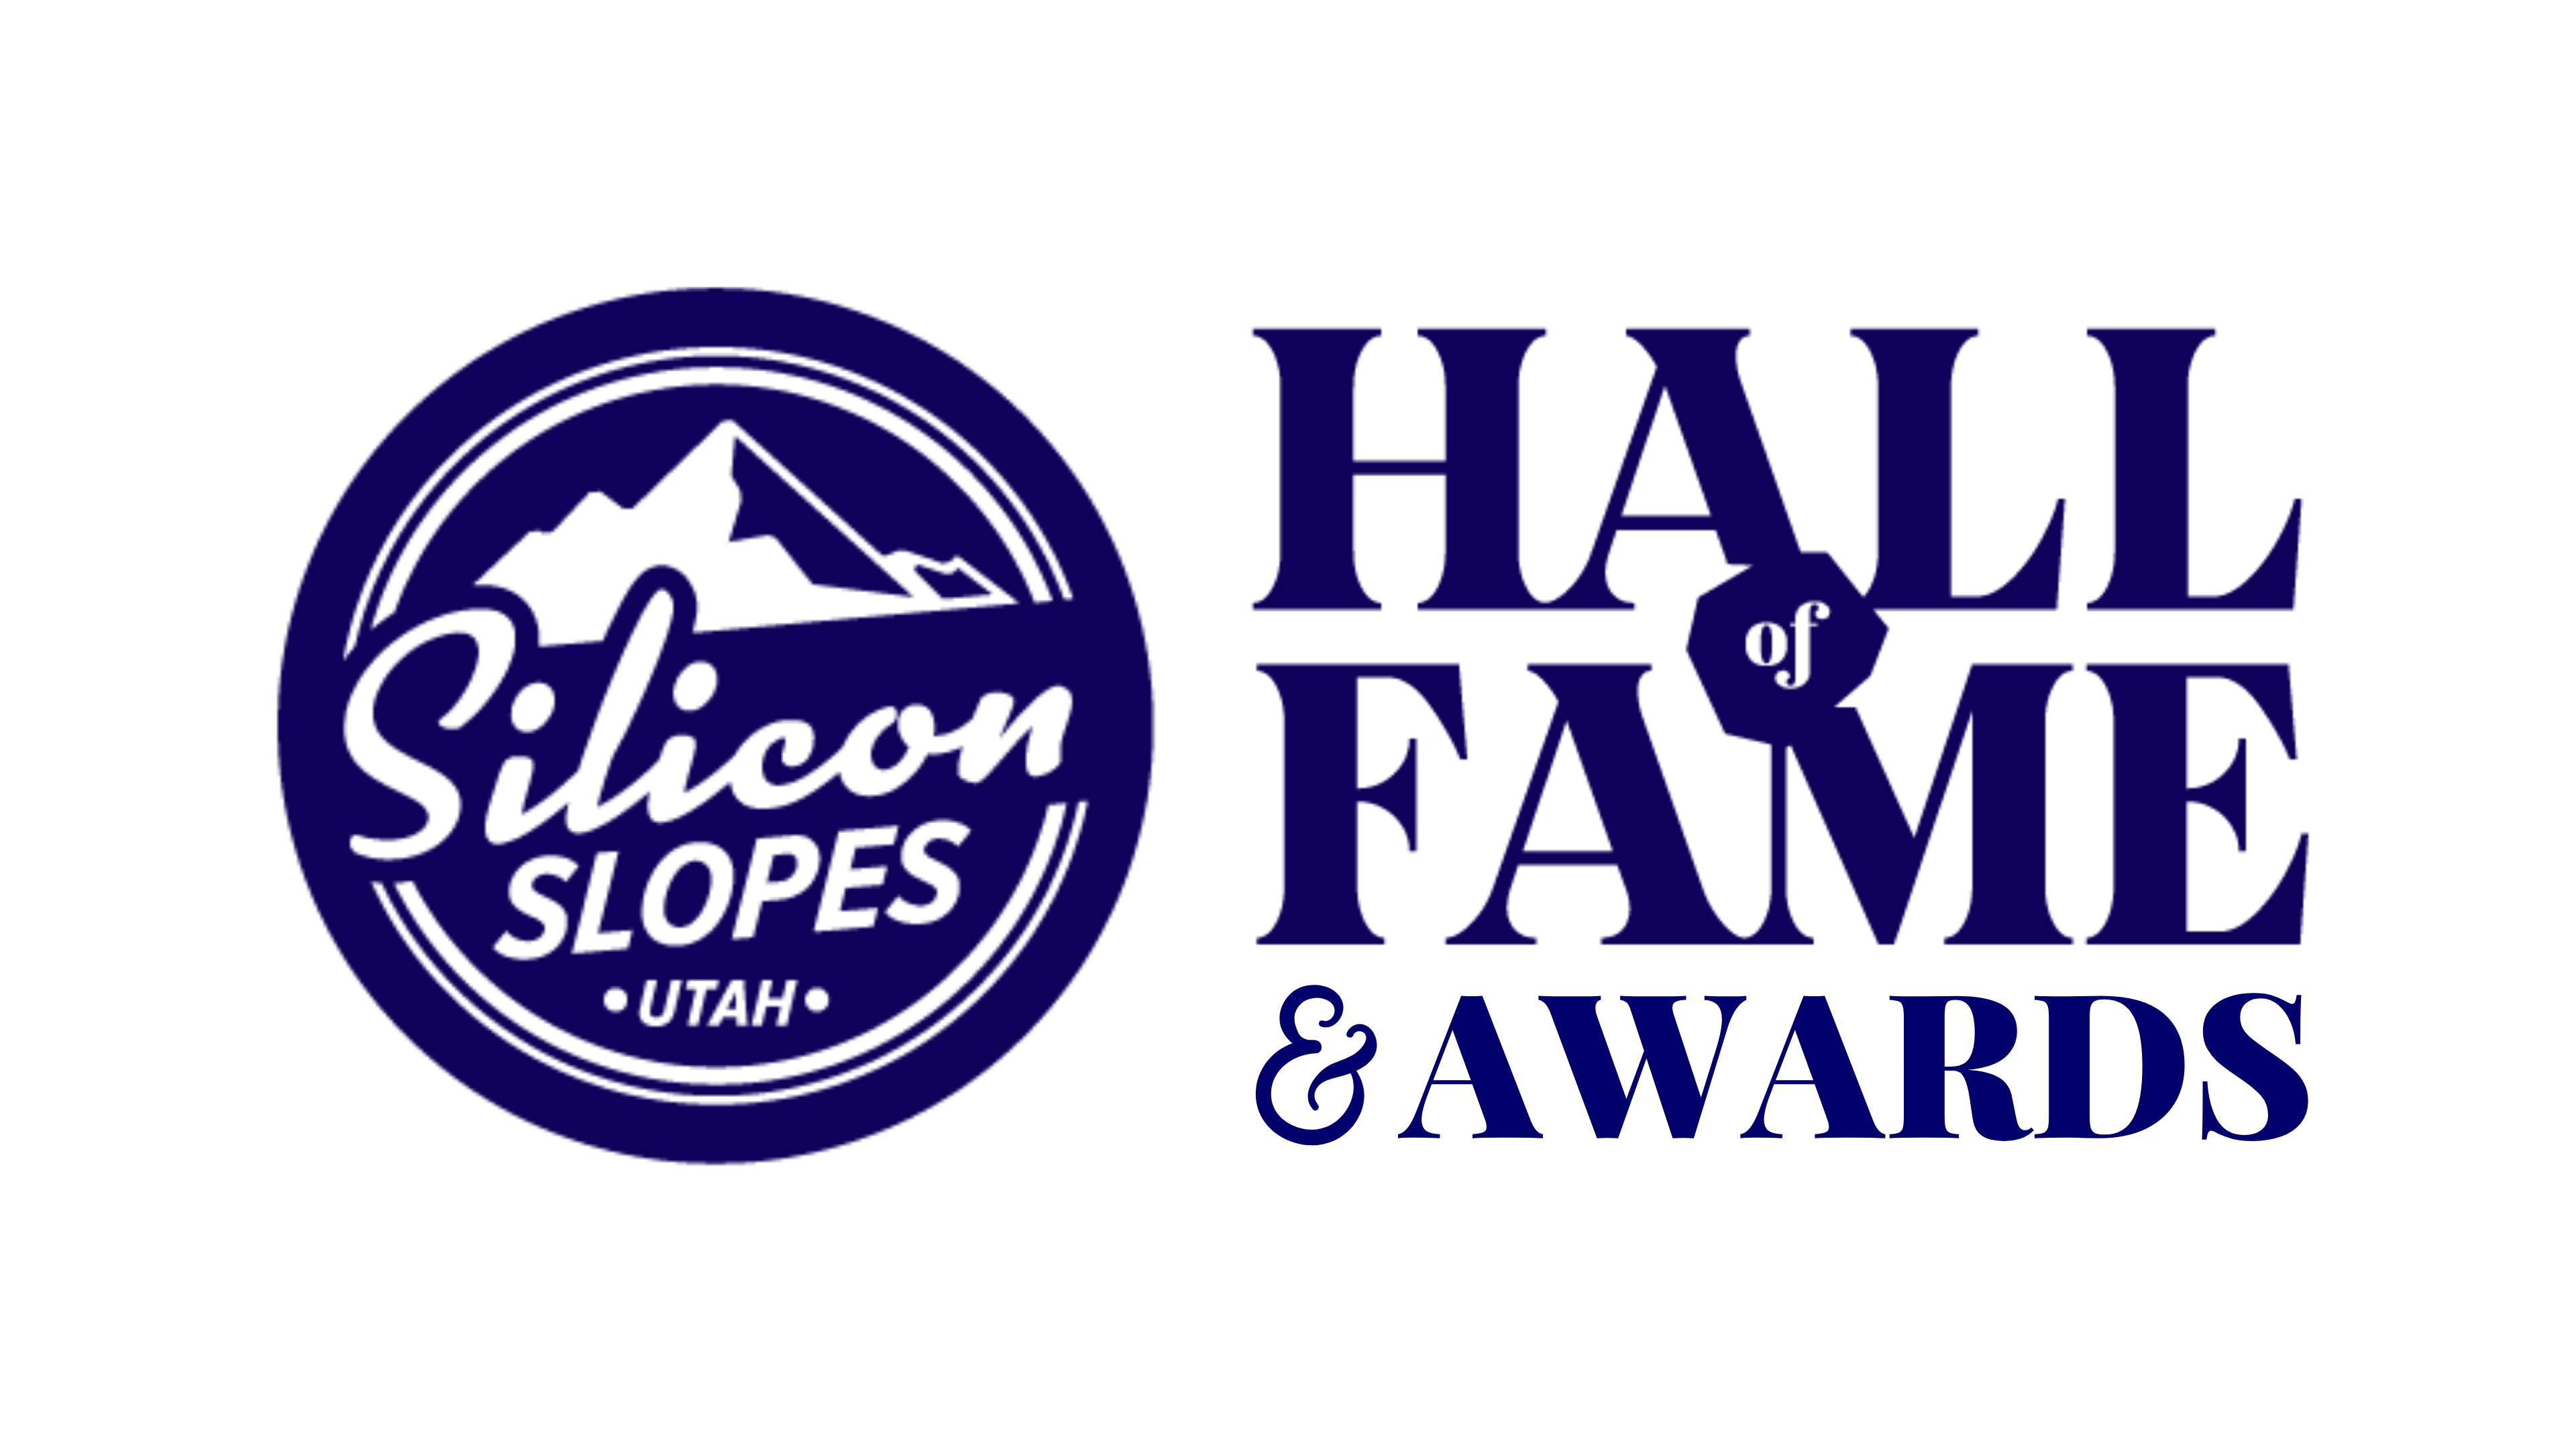 2021 Silicon Slopes Hall of Fame and Awards logo